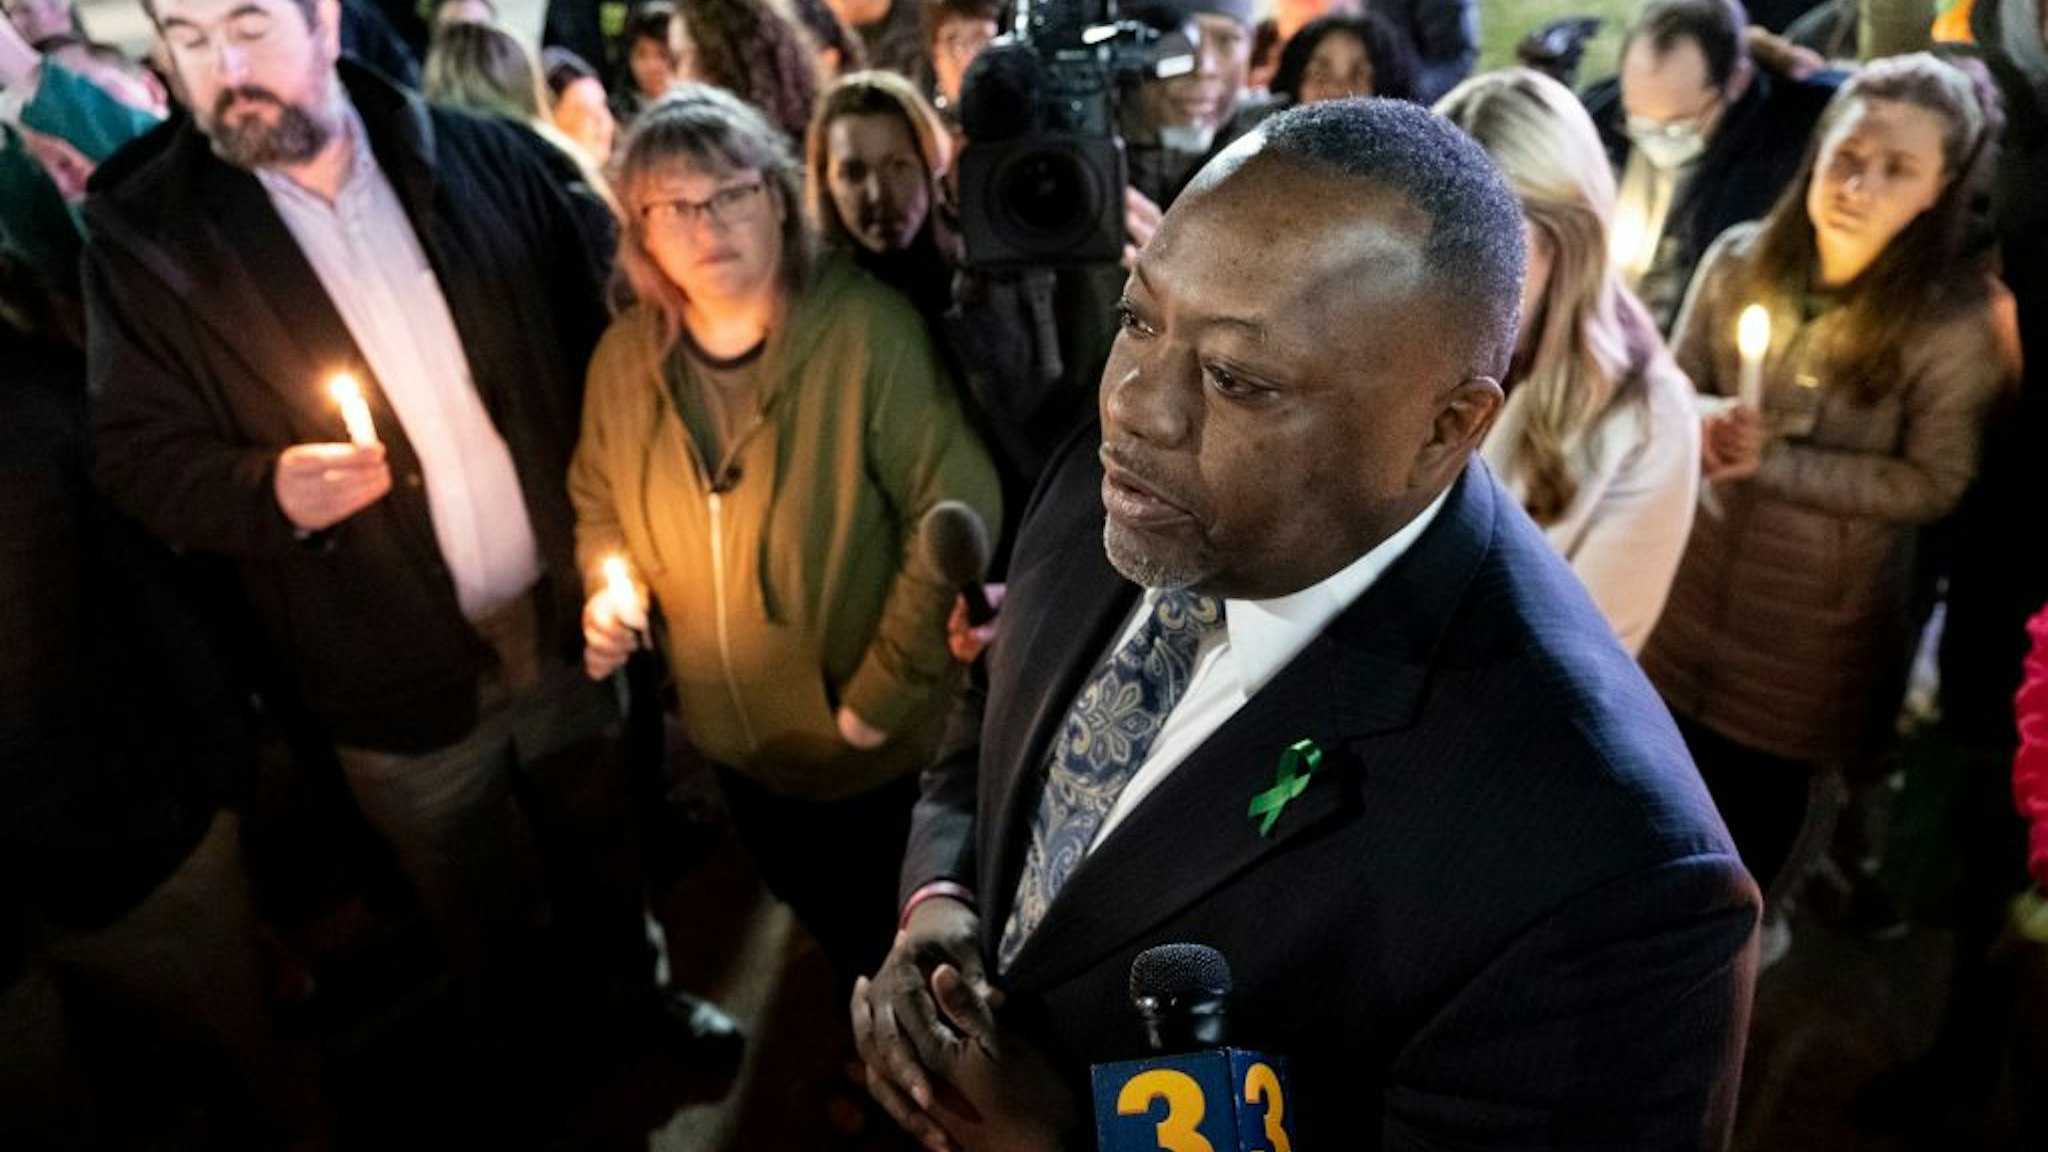 Newport News superintendent George Parker speaks during a vigil for Abby Zwerner, the teacher shot by a 6-year-old student at Richneck Elementary, in front of the Newport News Public Schools Administration Building on Jan. 9, 2023. Shortly after the shooting, police said Zwerner had life-threatening injuries, but she has improved and was listed in stable condition at a local hospital.